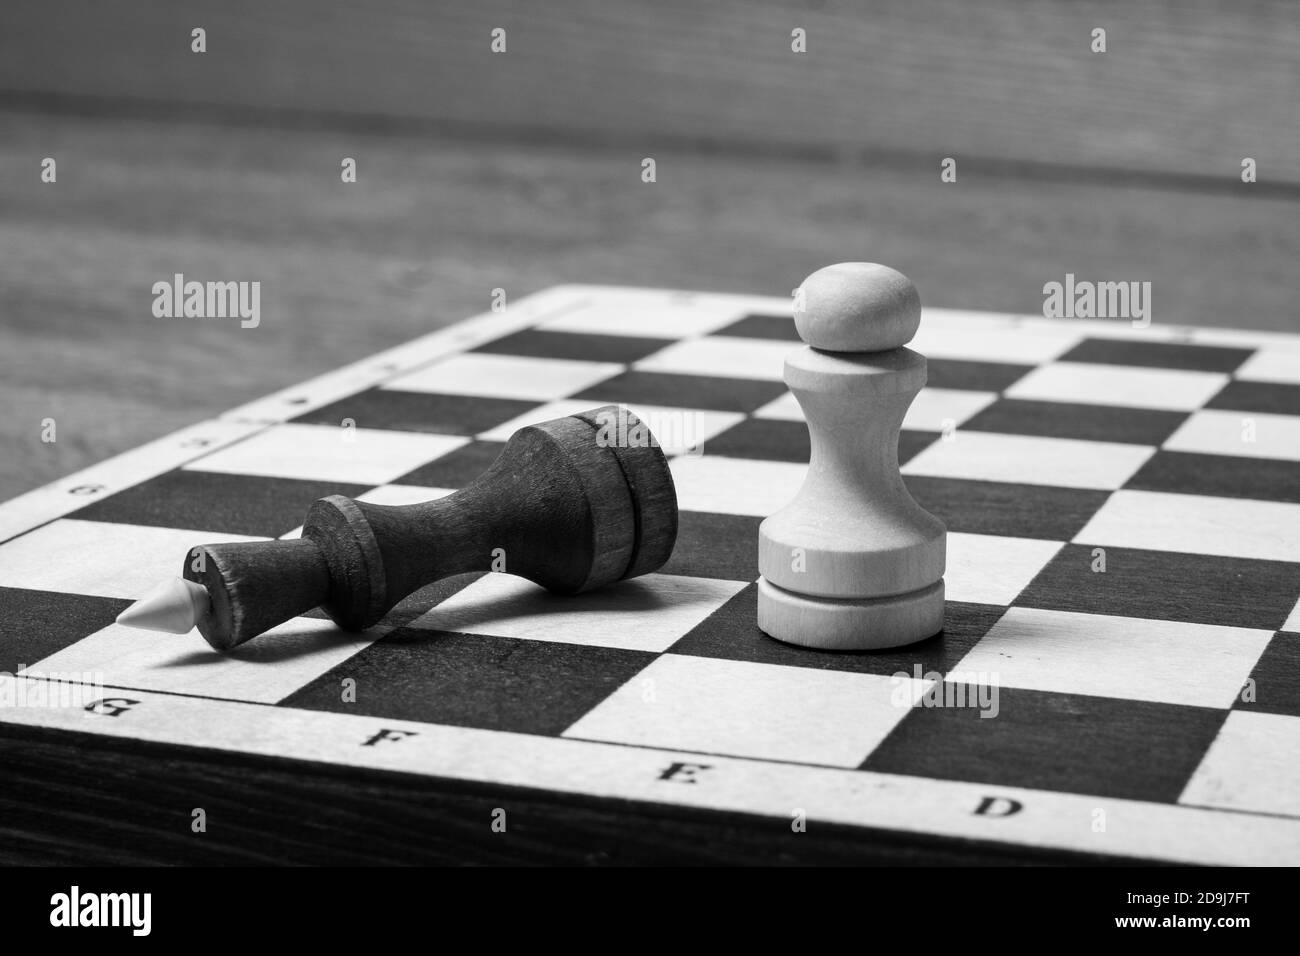 The end of the chess game, the white pawn defeated the dark king. The fallen chess king as a metaphor for the fall of power. Business concept copy space, selective focus, black and white Stock Photo